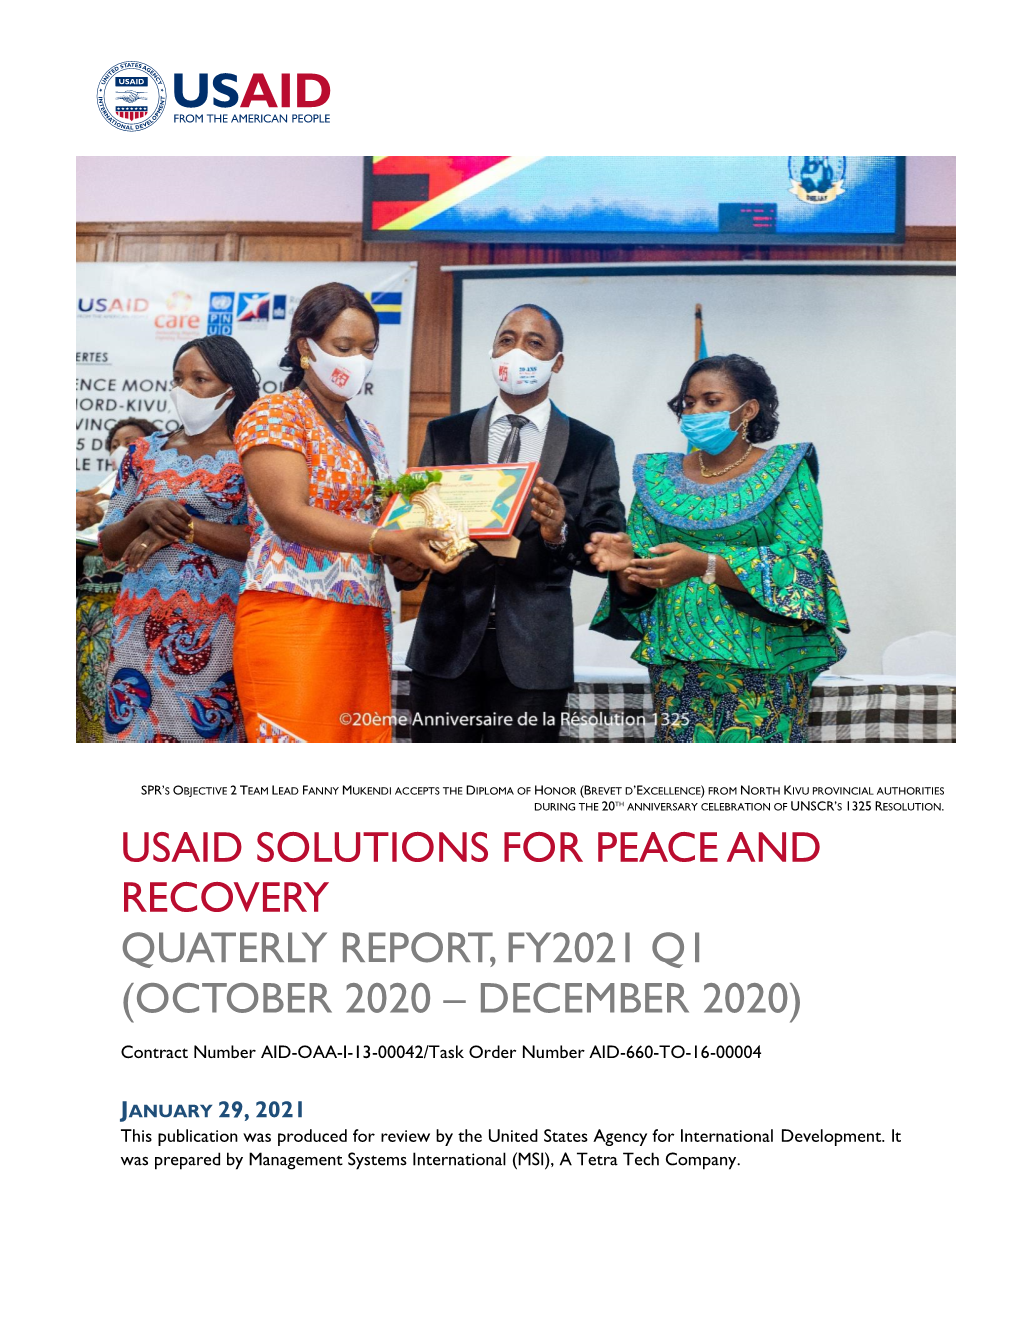 Usaid Solutions for Peace and Recovery Quaterly